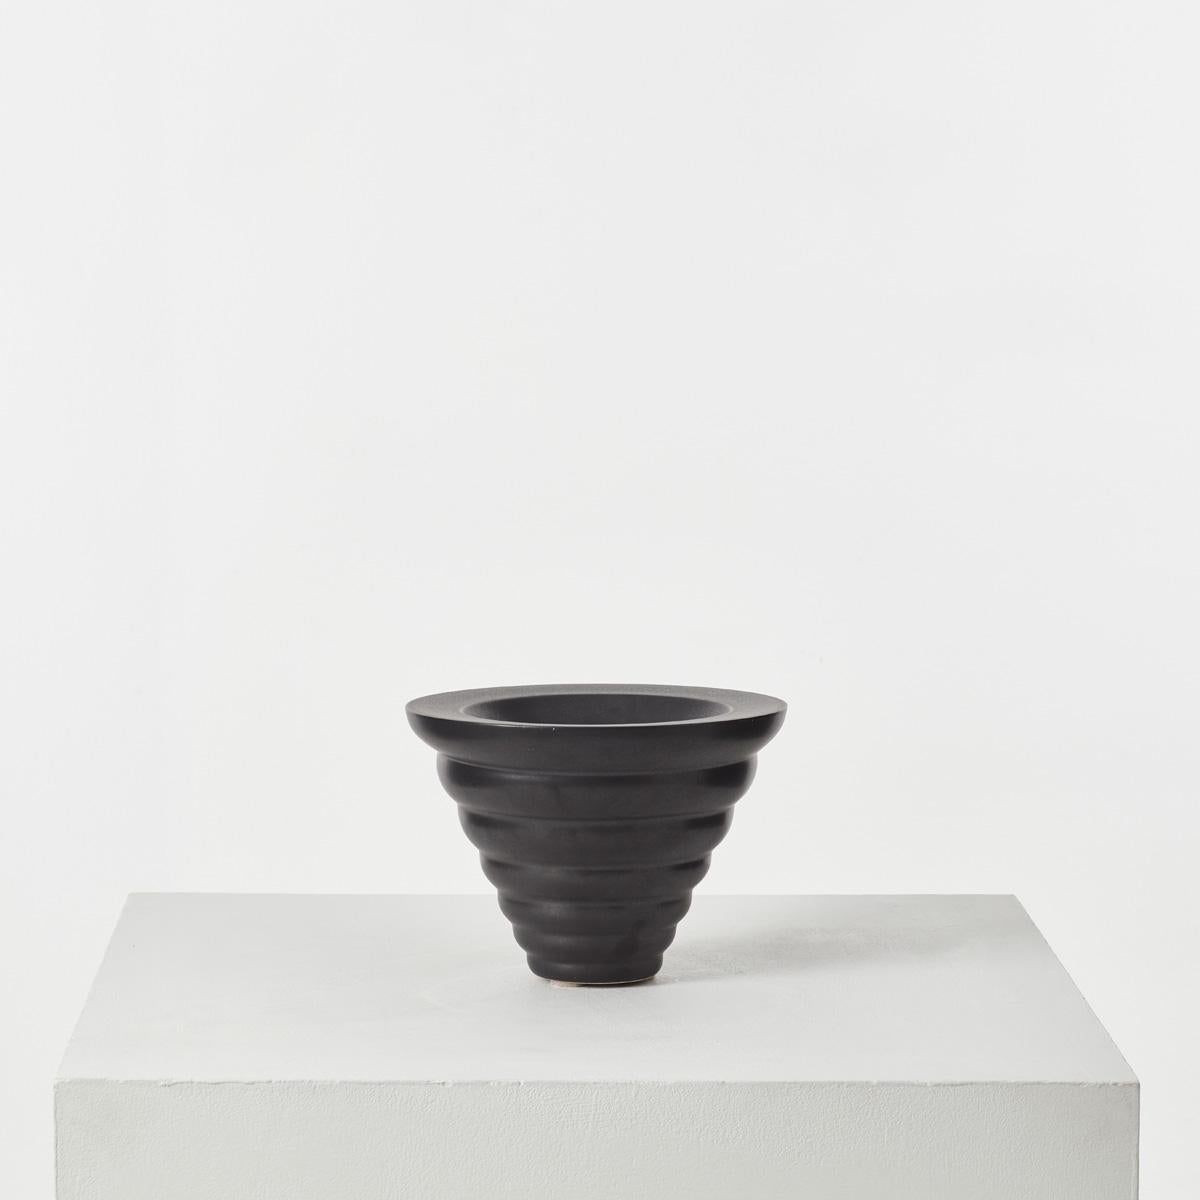 A black glazed vase or bowl by Dutch designer Ines Van der Sluis. It has a distinct rippled conical form, finished in an off-black glaze.

In good vintage condition. One marked underside with the artist’s name and ‘Designum,’ one not. 

J110b: H21